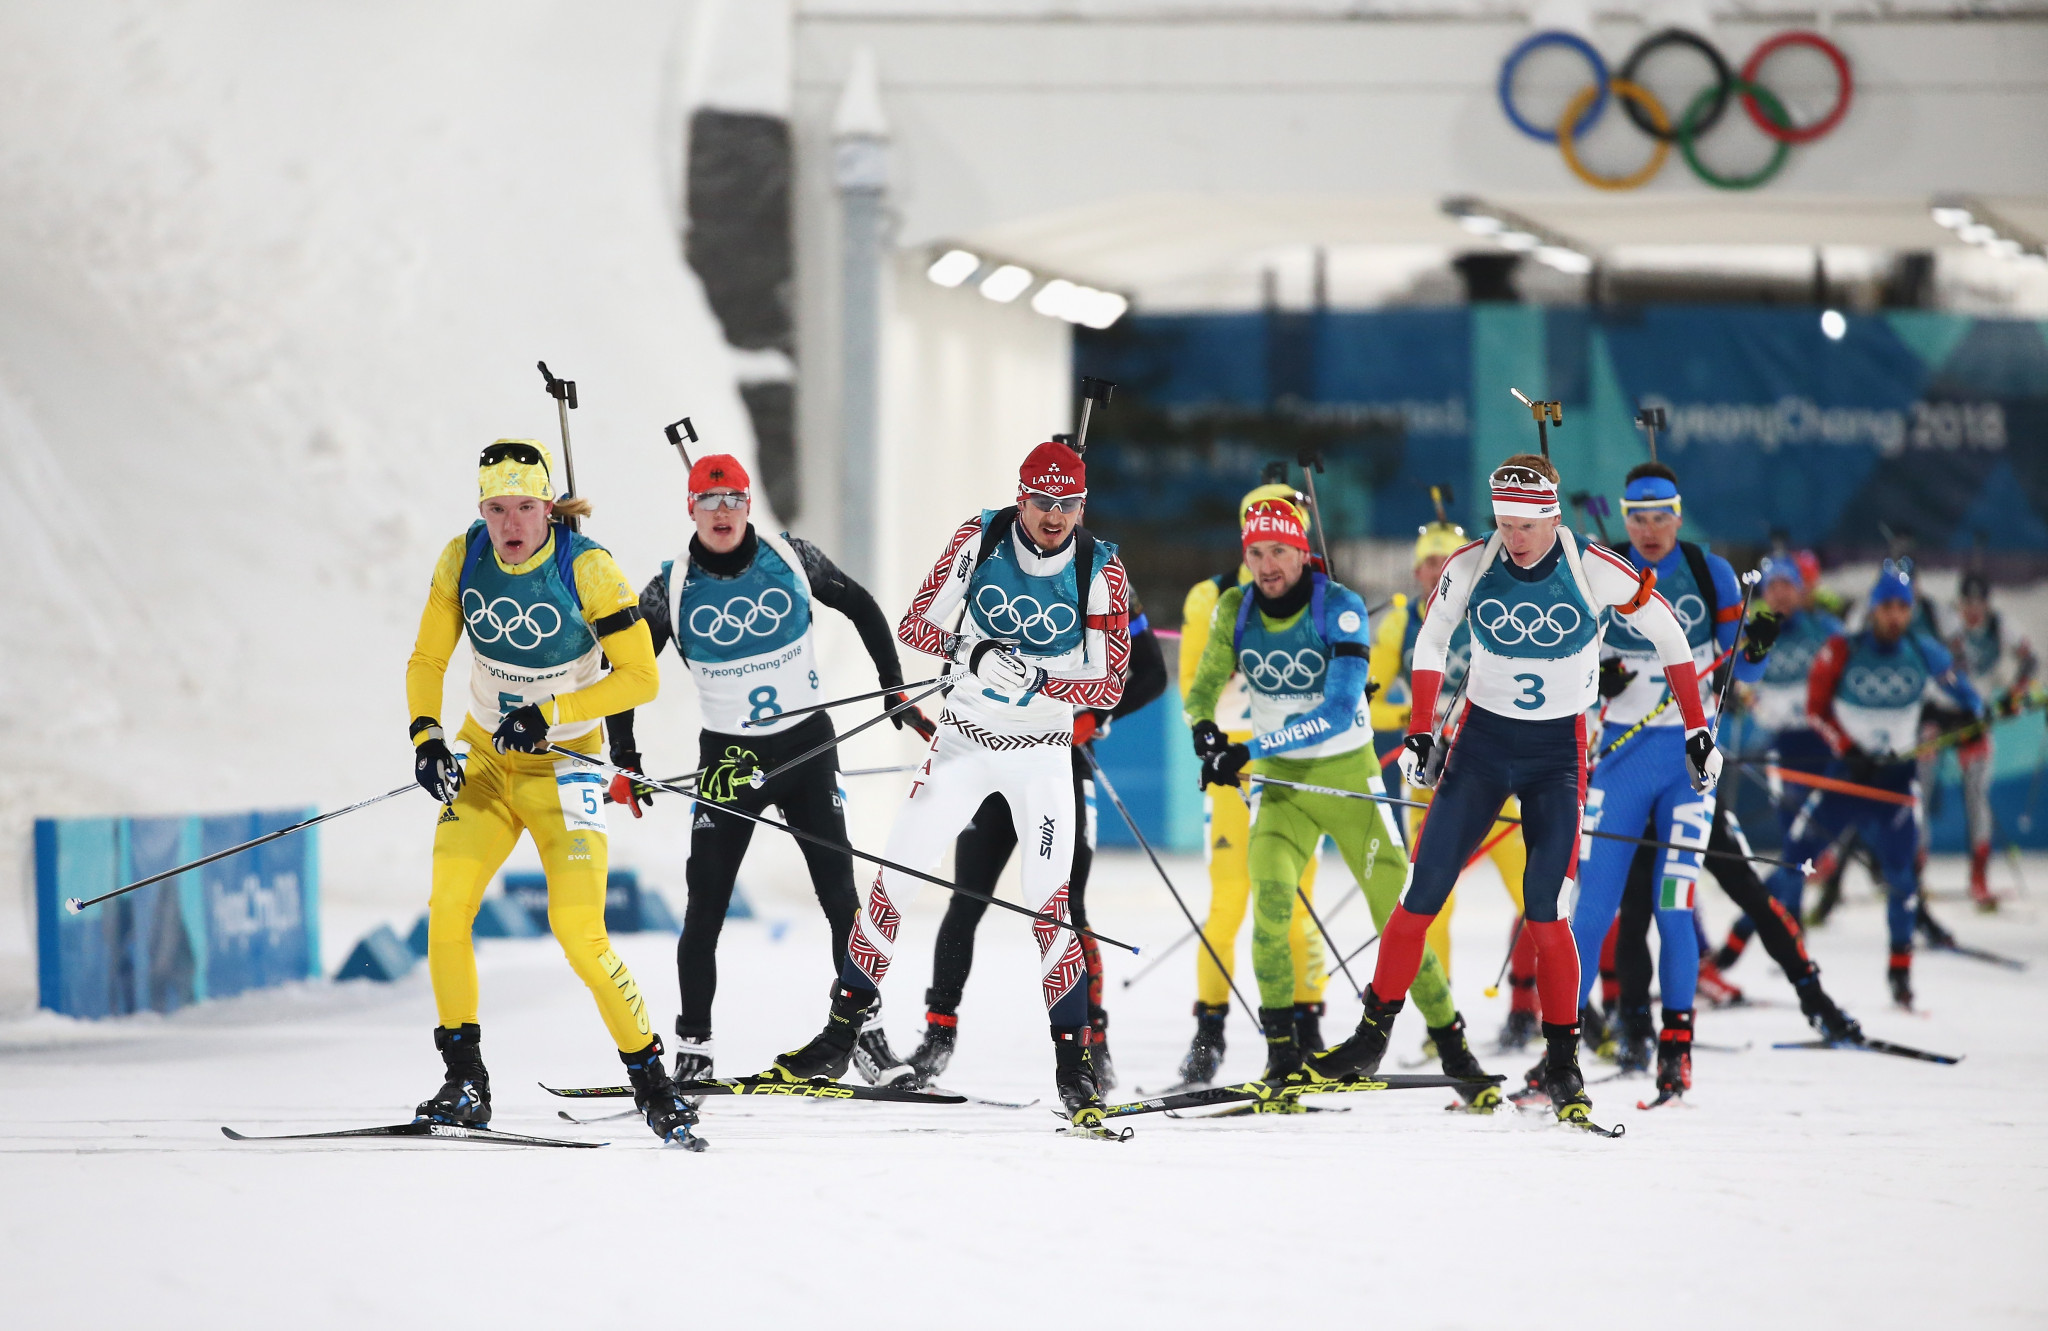 Sweden's Sebastian Samuelsson has urged other athletes to consider boycotting events in Russia ©Getty Images